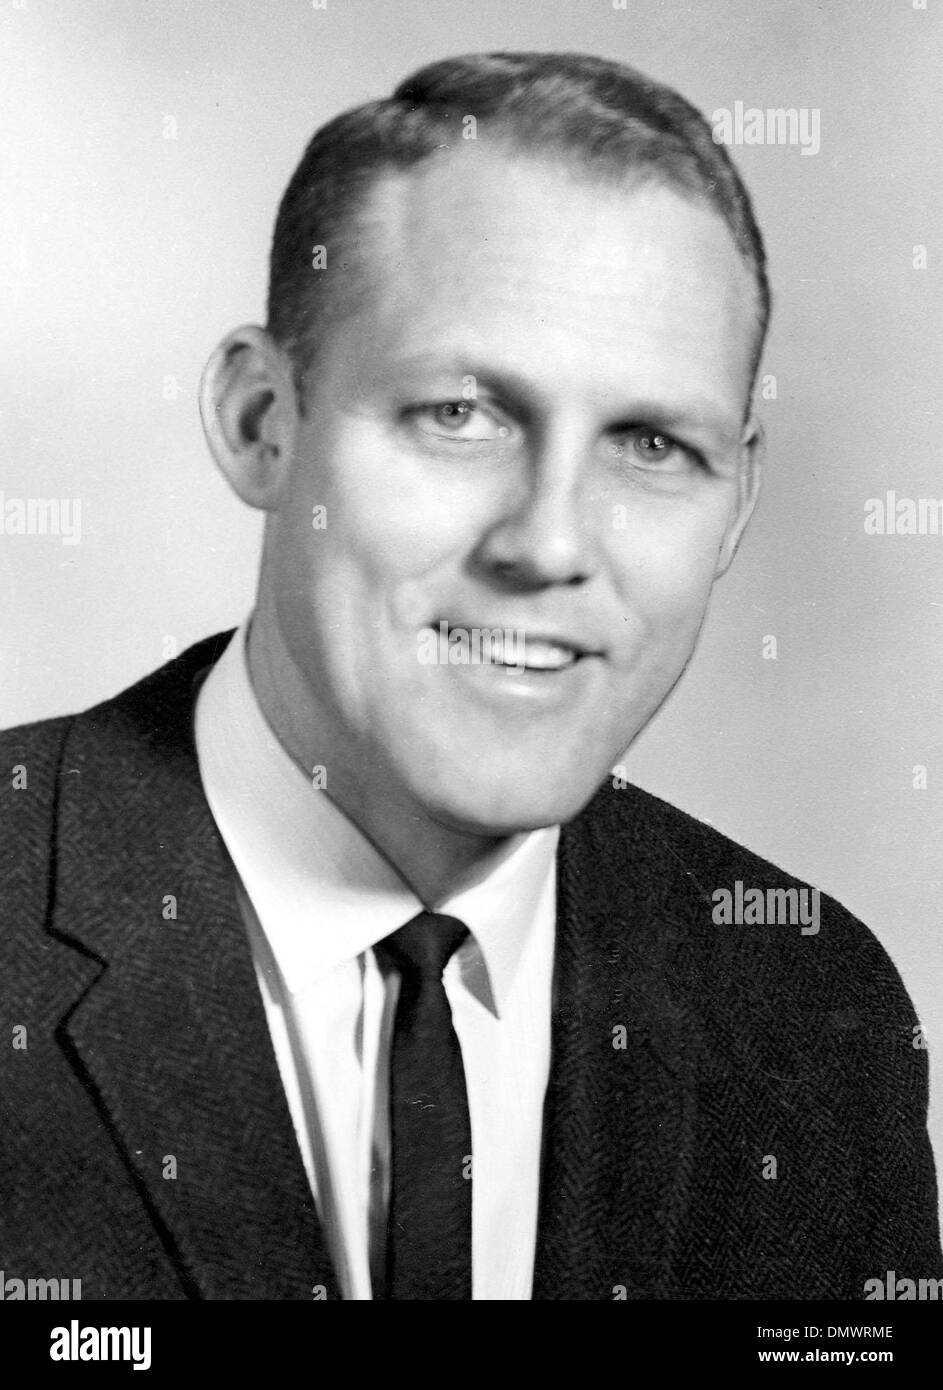 WILLIAM ERNEST WALSH (November 30, 1931 – July 30, 2007), one of the greatest football coaches of all time. Bill Walsh, the inventor of the West Coast Offense, died at the age of 75, following a long battle with leukemia.  Walsh didn't become an NFL head coach until 47, building the once-woebegone 49ers into the most successful team of the 1980s with his innovative offensive strate Stock Photo